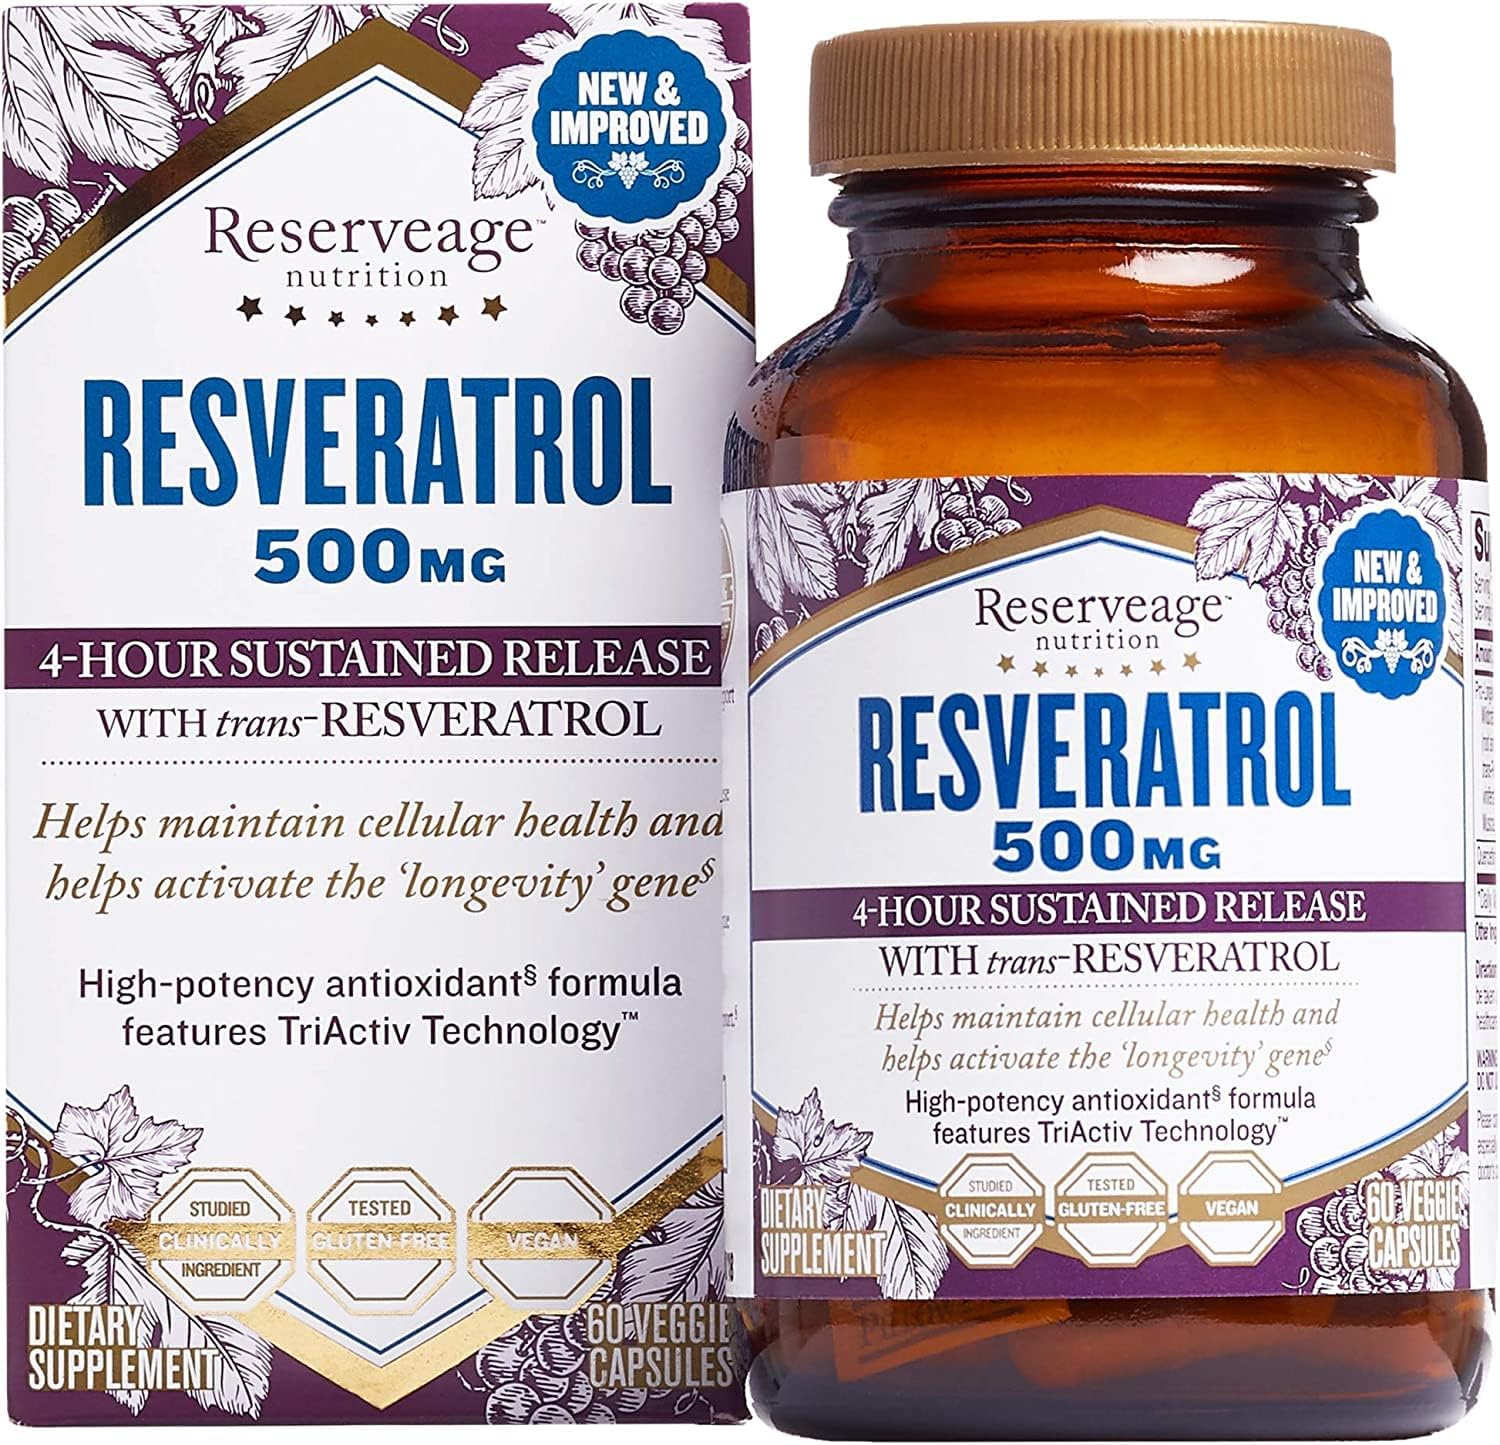 Reserveage, Resveratrol 500 mg, Antioxidant Supplement for Heart and Cellular Health, Supports Healt